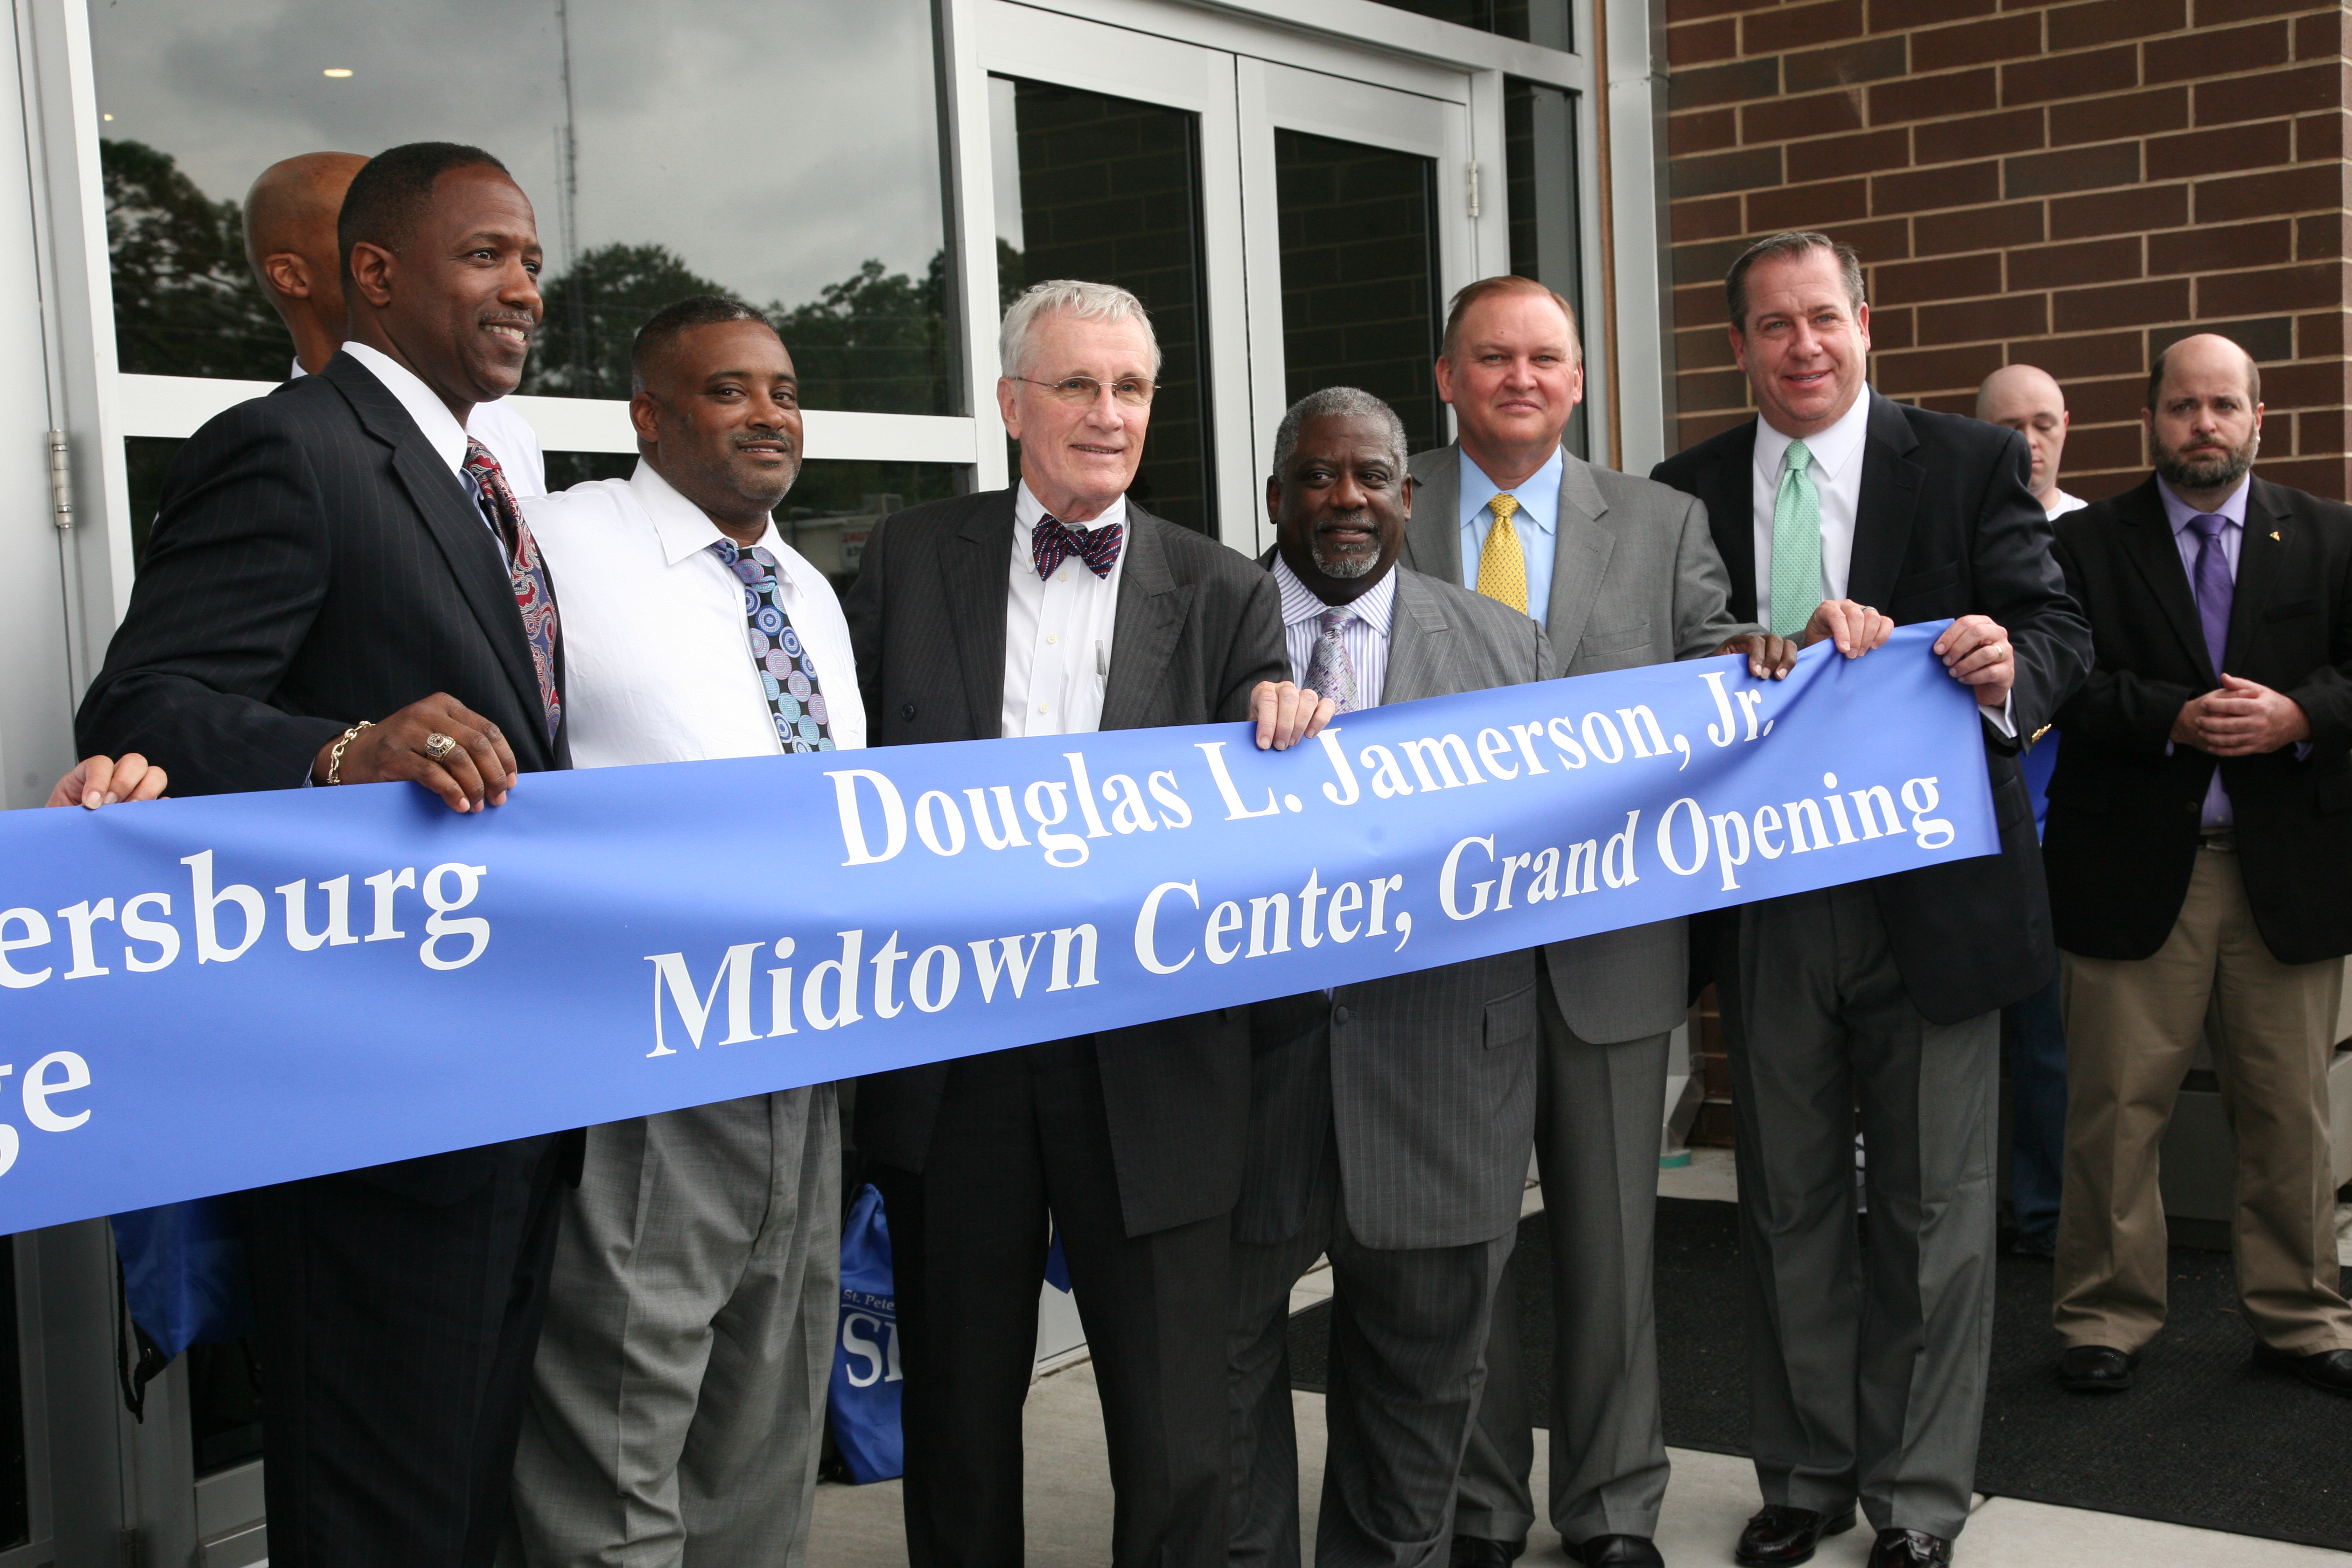 Grand opening of Midtown Center with Dr. William Law and several community leaders